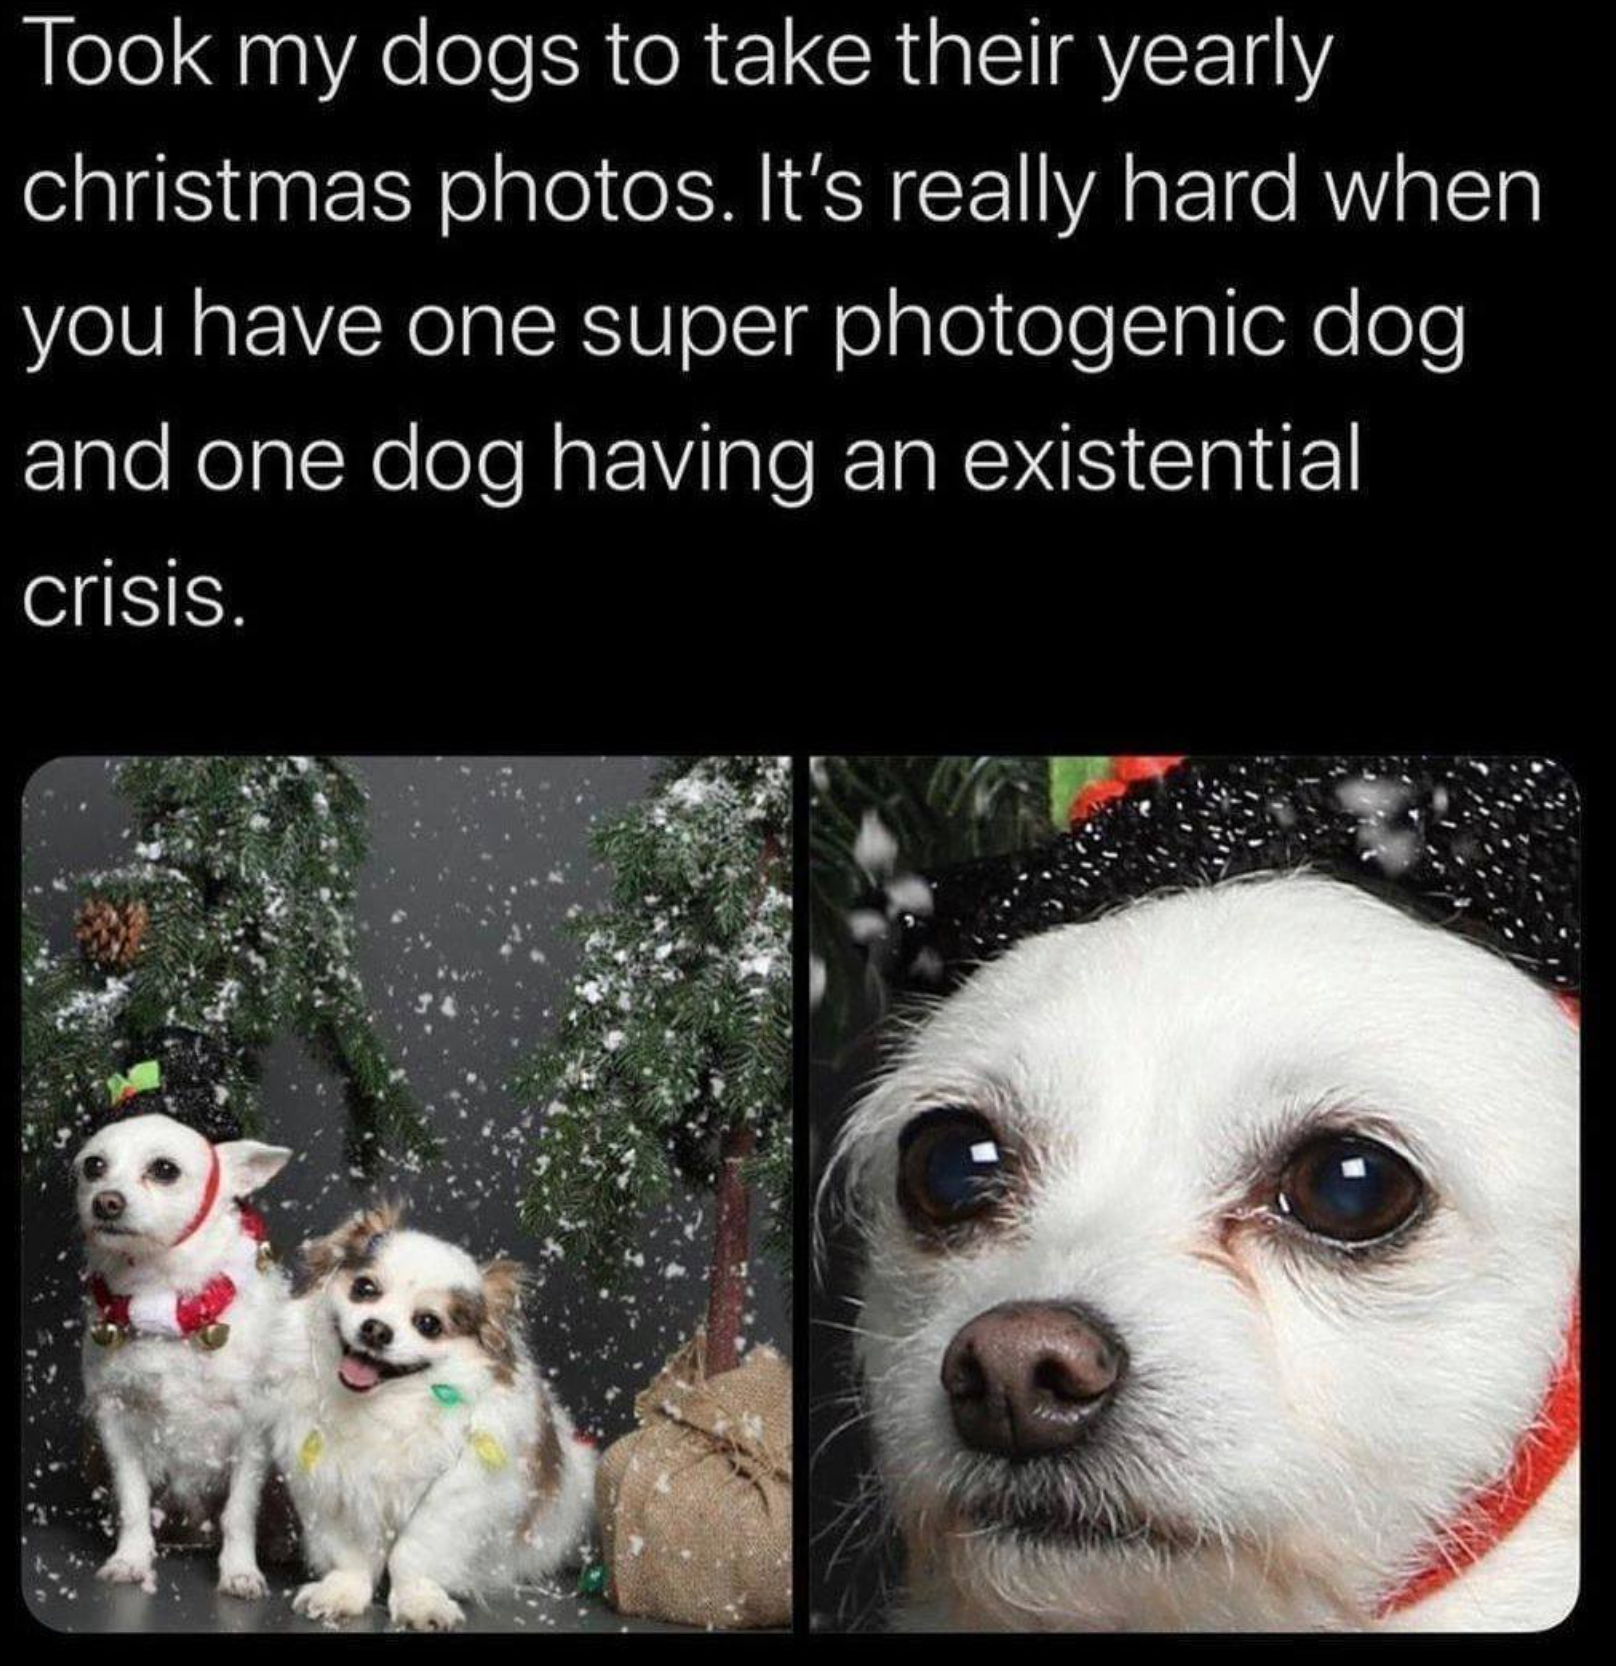 dog meme christmas - Took my dogs to take their yearly christmas photos. It's really hard when you have one super photogenic dog and one dog having an existential crisis.